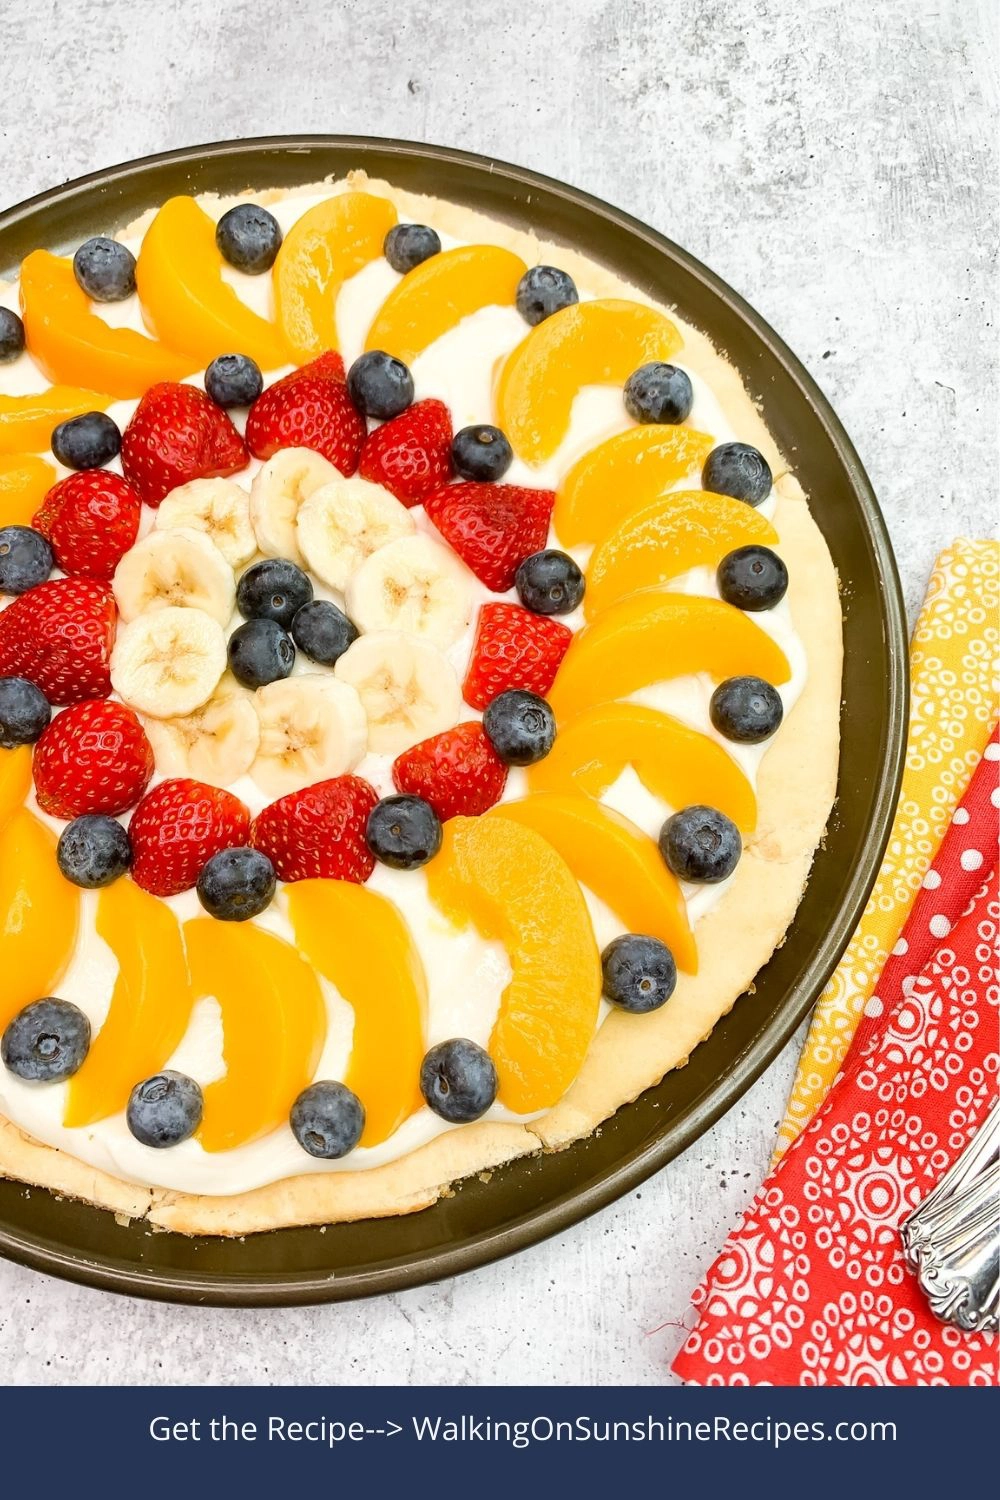 Crescent Roll Fruit Pizza with bananas, peaches, strawberries and blueberries. 